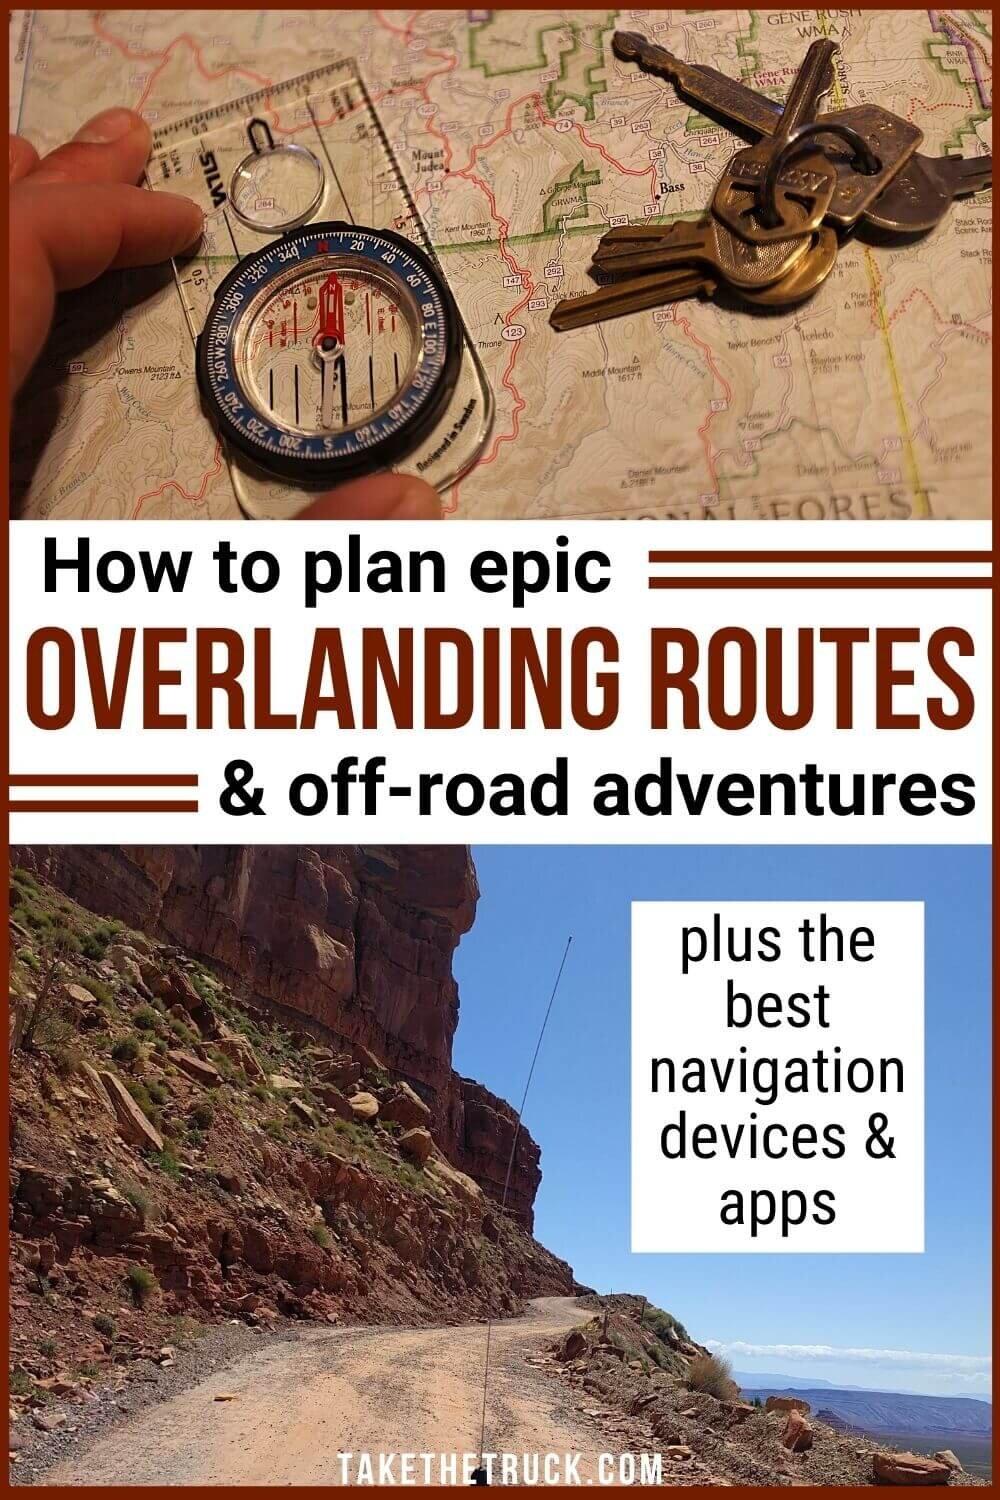 Want to find overlanding destinations &amp; places along with exciting overlanding routes? Learn to plan overlanding road trips, weekend overlanding trips, or overlanding expeditions with these tips!